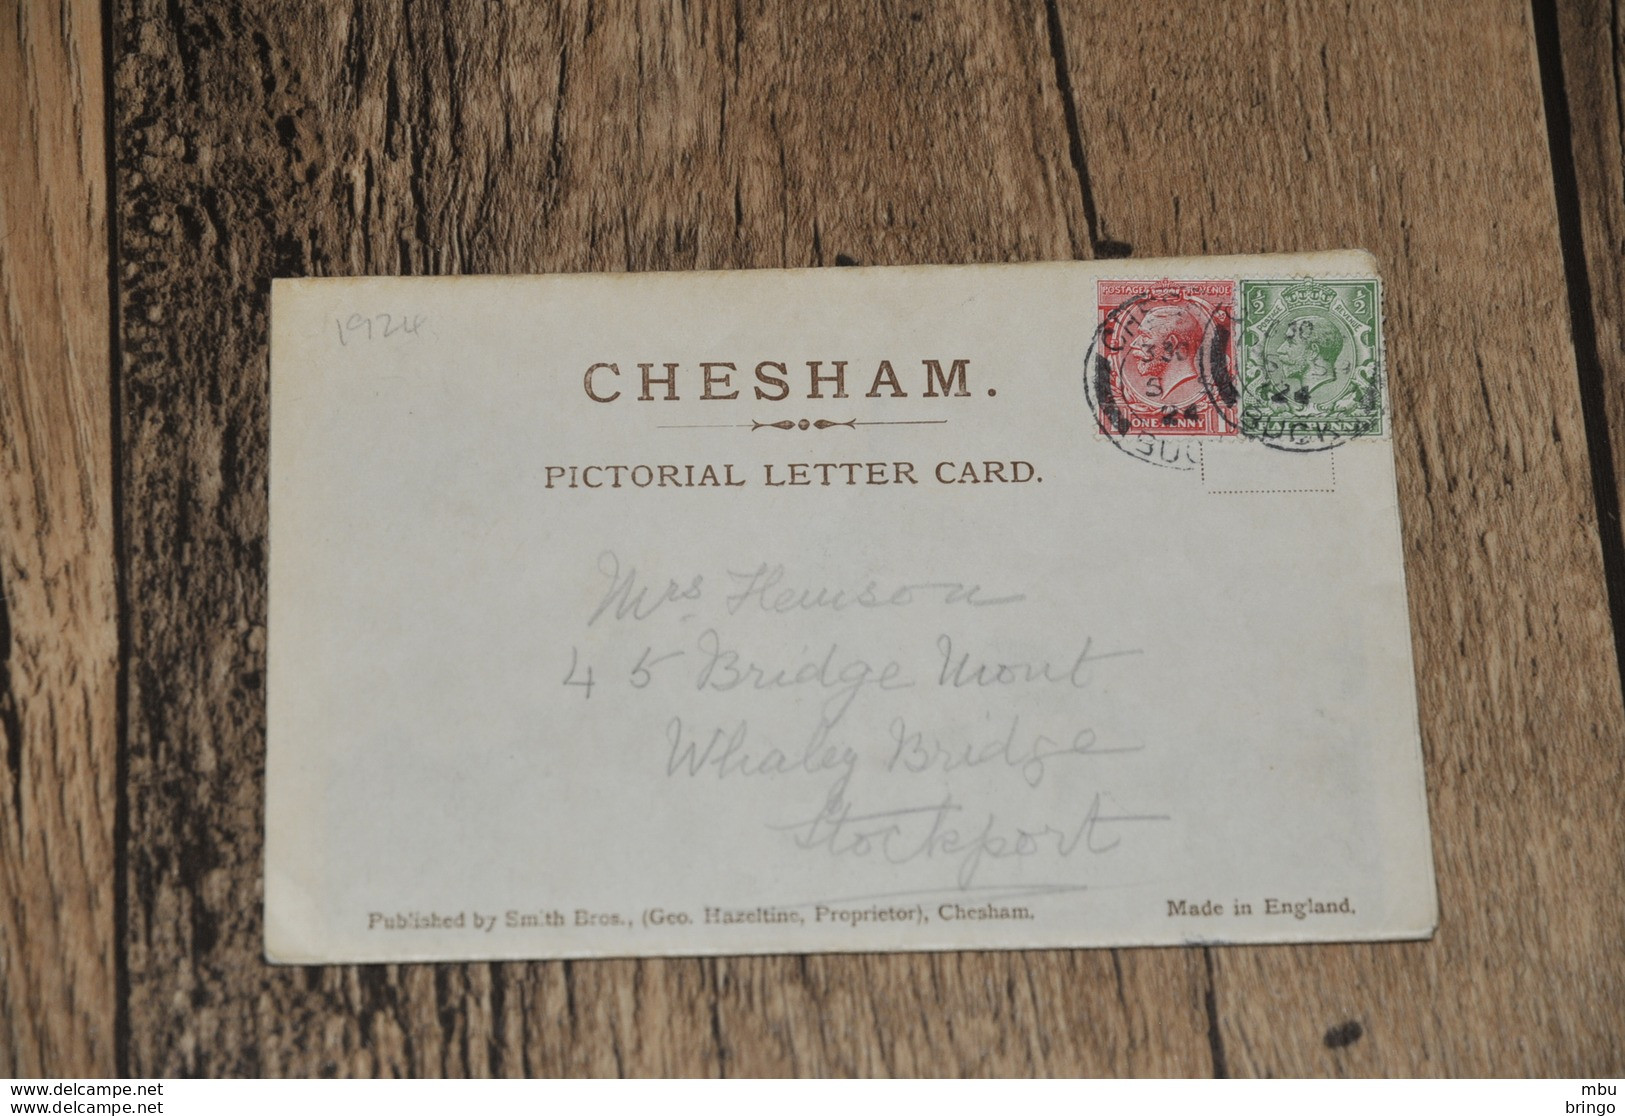 A2077   5 View Letter Card  Of Chesham - 1924 - Buckinghamshire